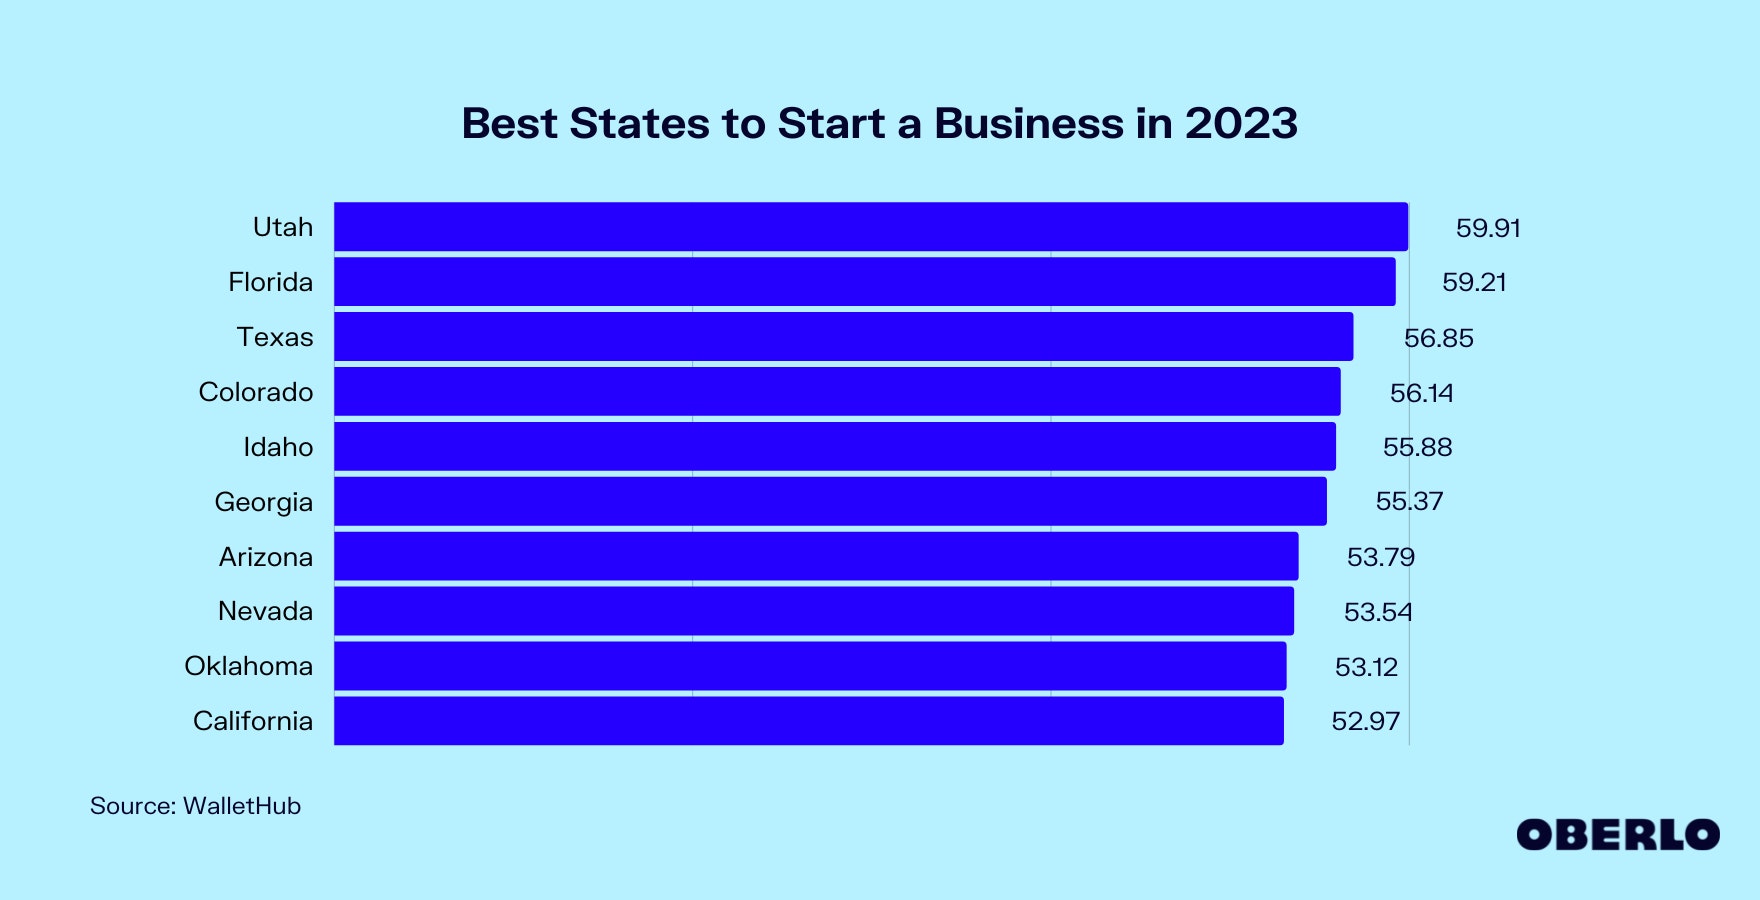 Chart showing the Best States to Start a Business in 2023